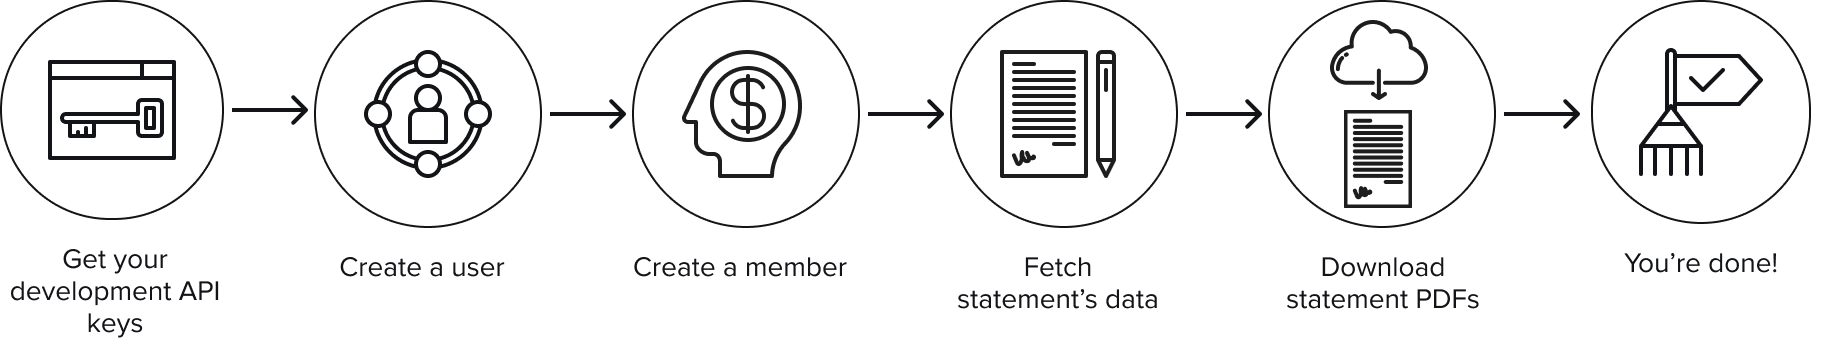 Diagram flow of the steps to get account statements